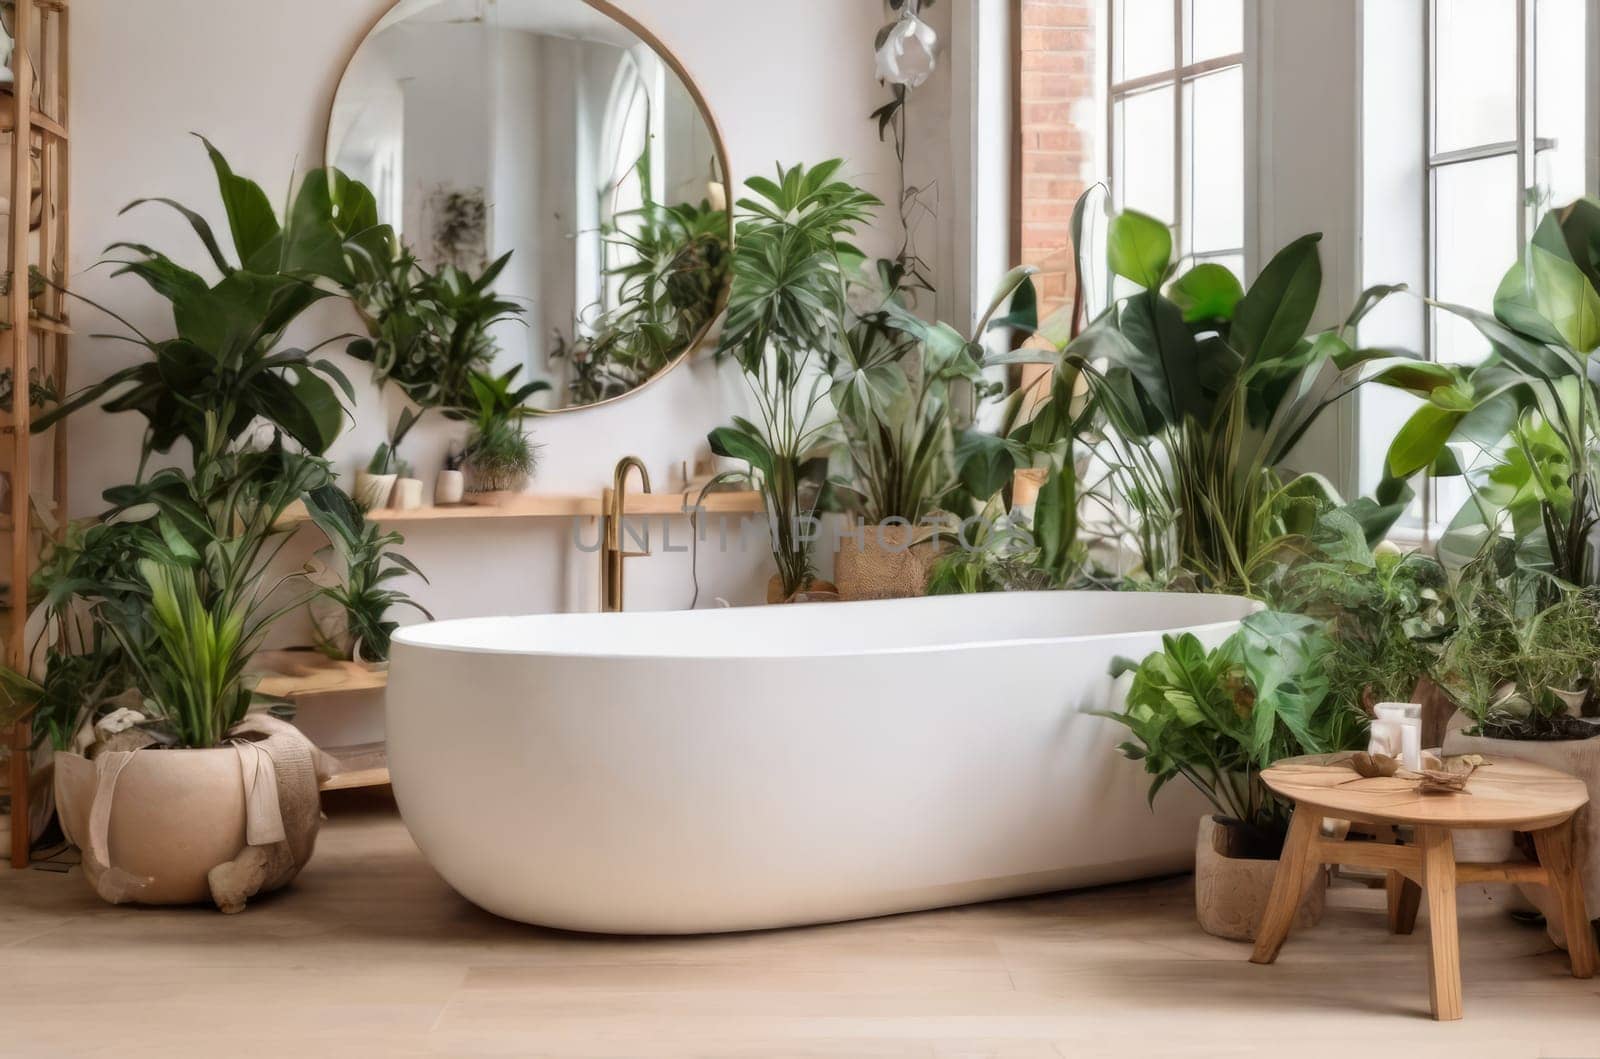 Inviting composition highlighting a home garden bathroom with a biophilia concept, where white and wooden accents complement the array of houseplants, creating a serene and naturalistic atmosphere